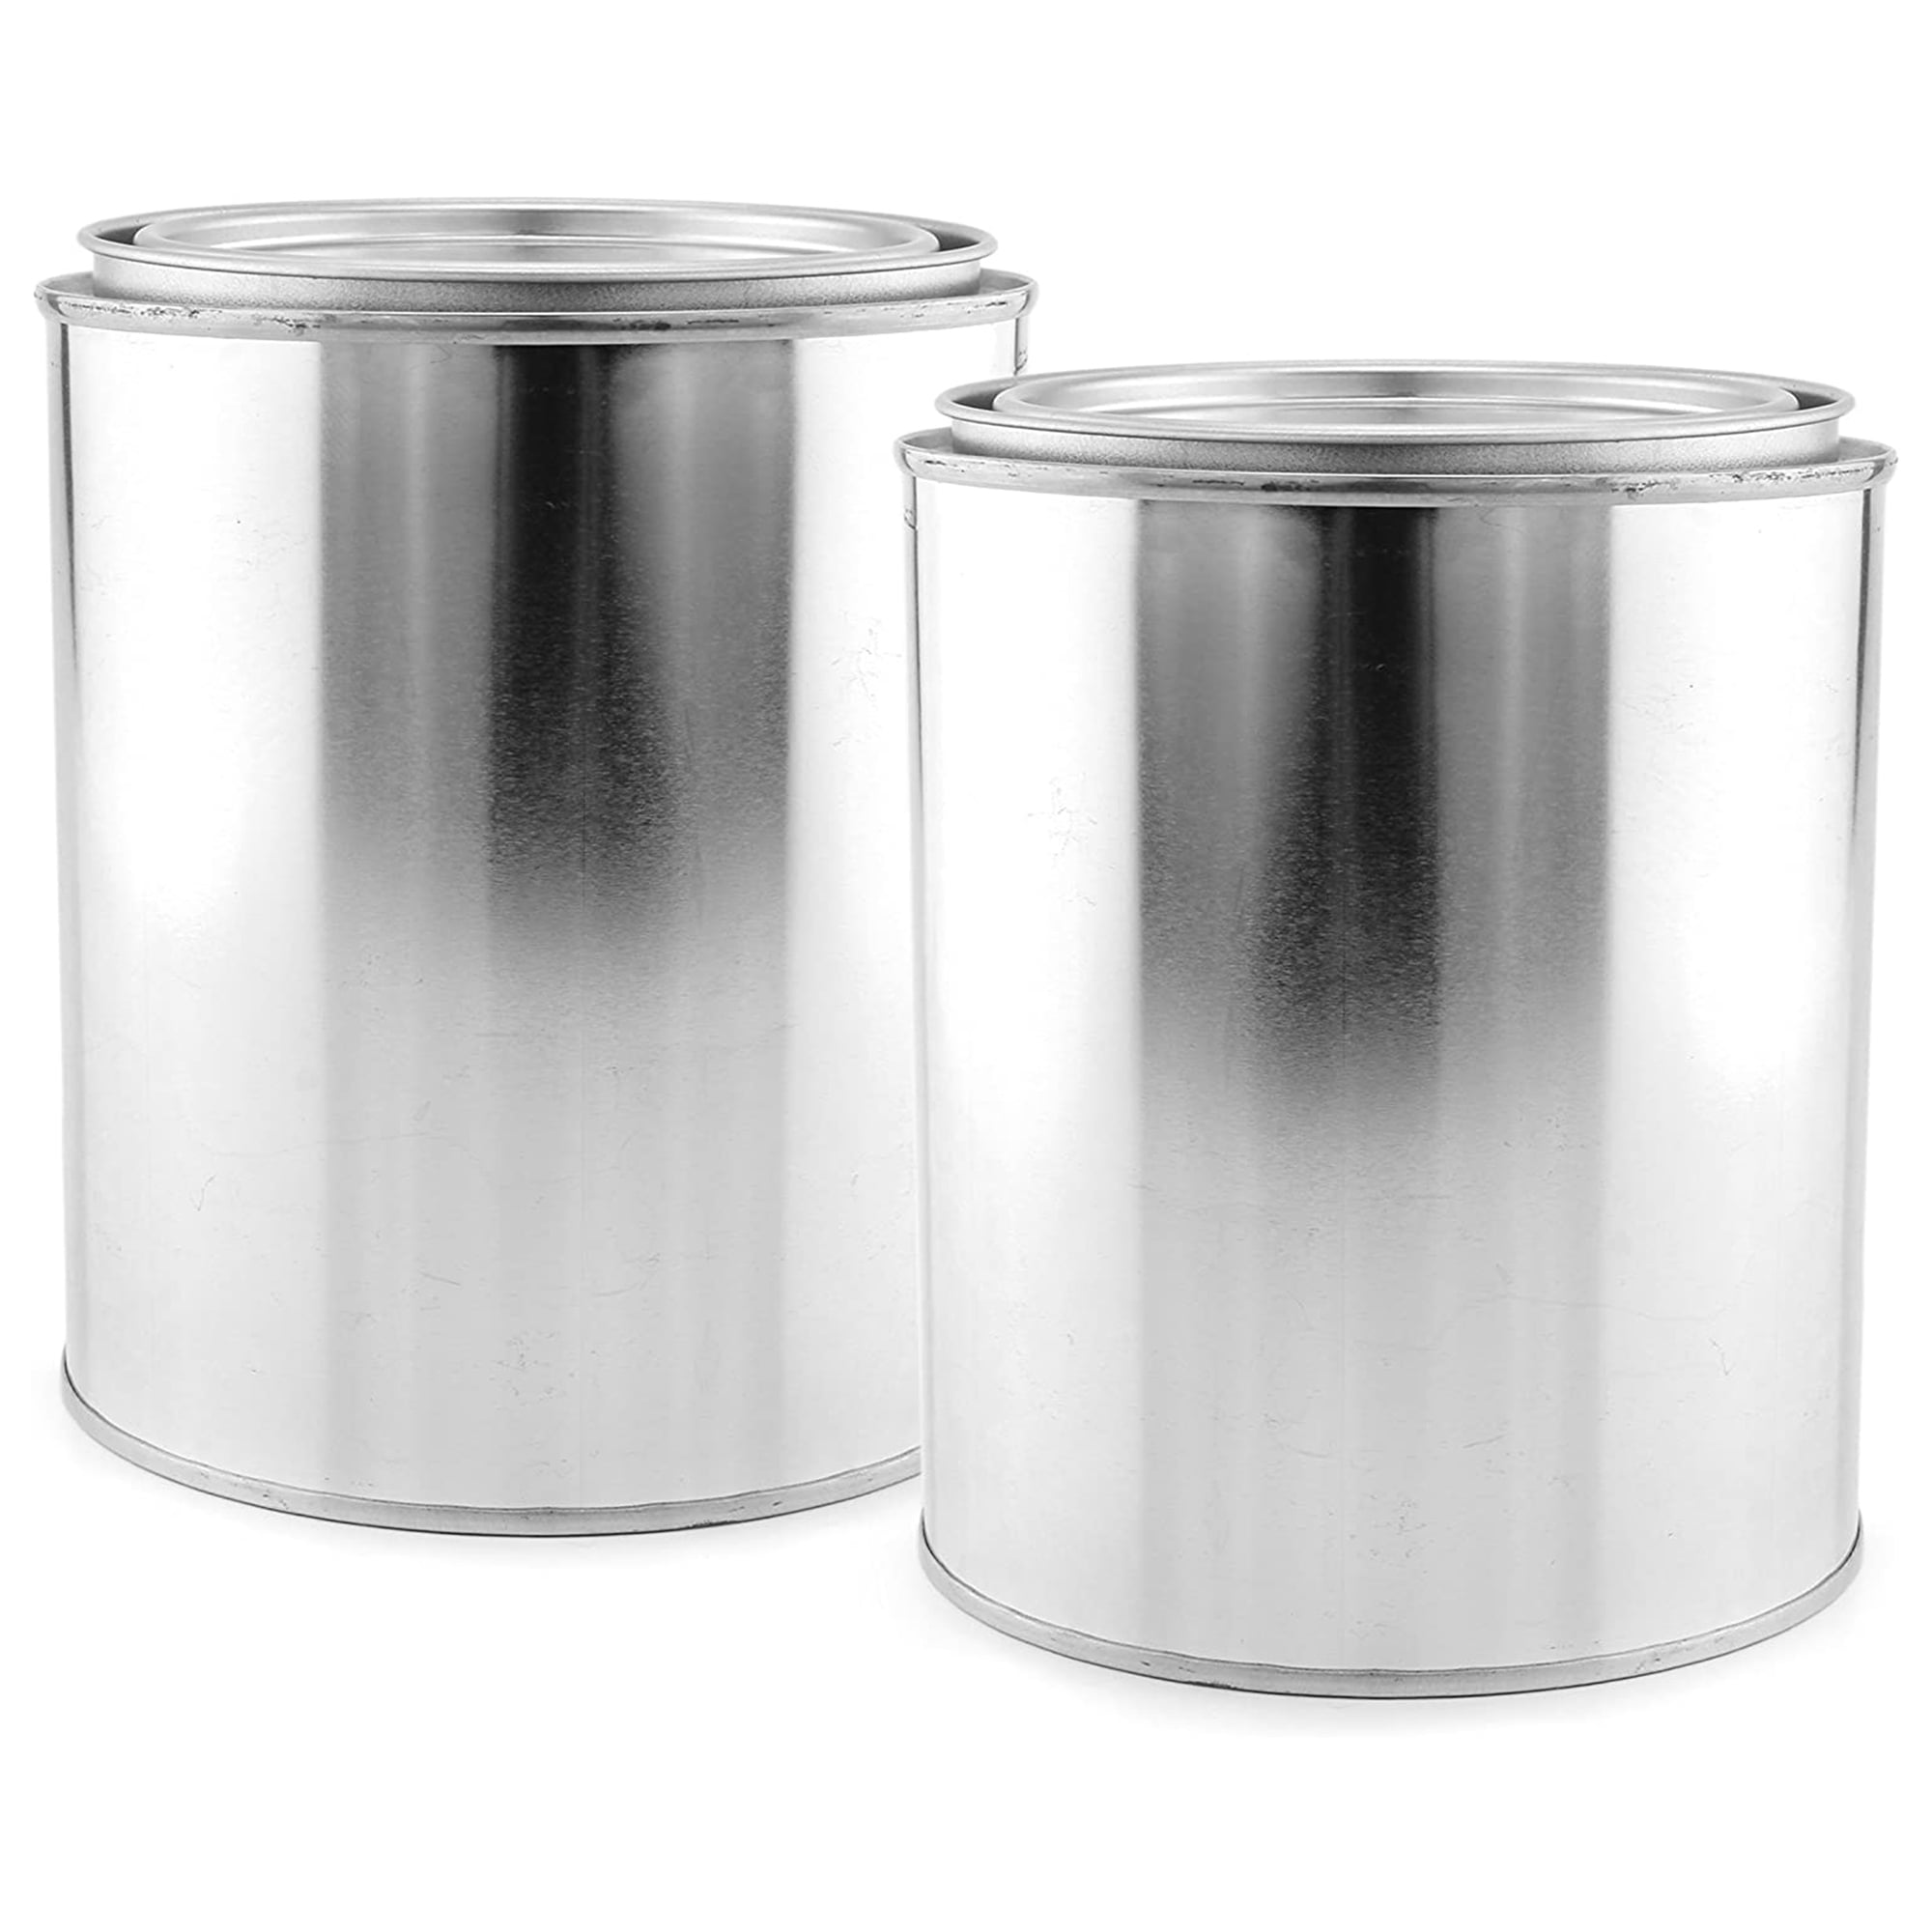 15 Pcs Mini Clear Paint Can Containers 2.95 Inch Tall Empty Paint